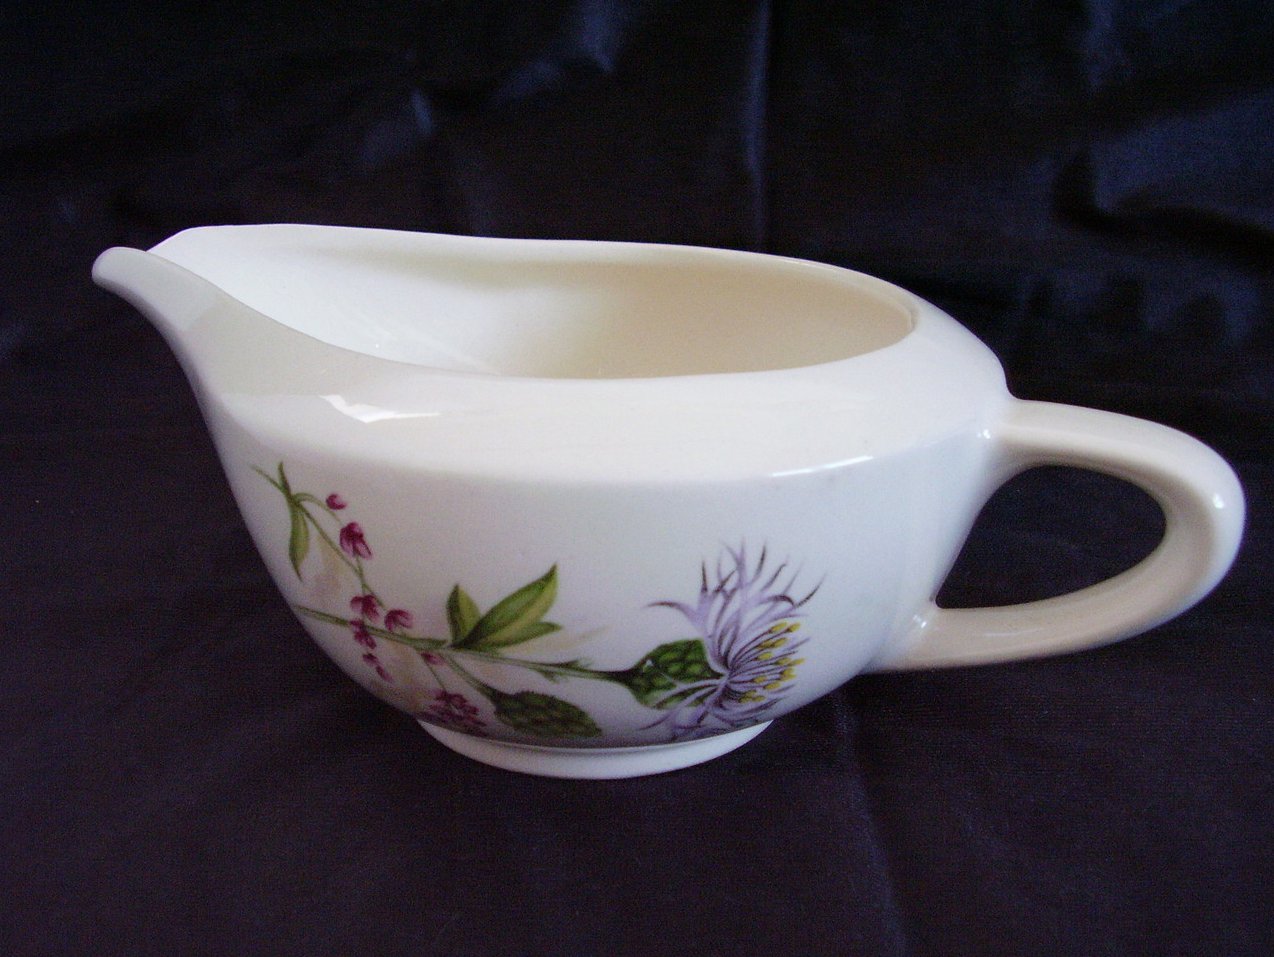 American Limoges Glamour Thistle Gravy Sauce Boat